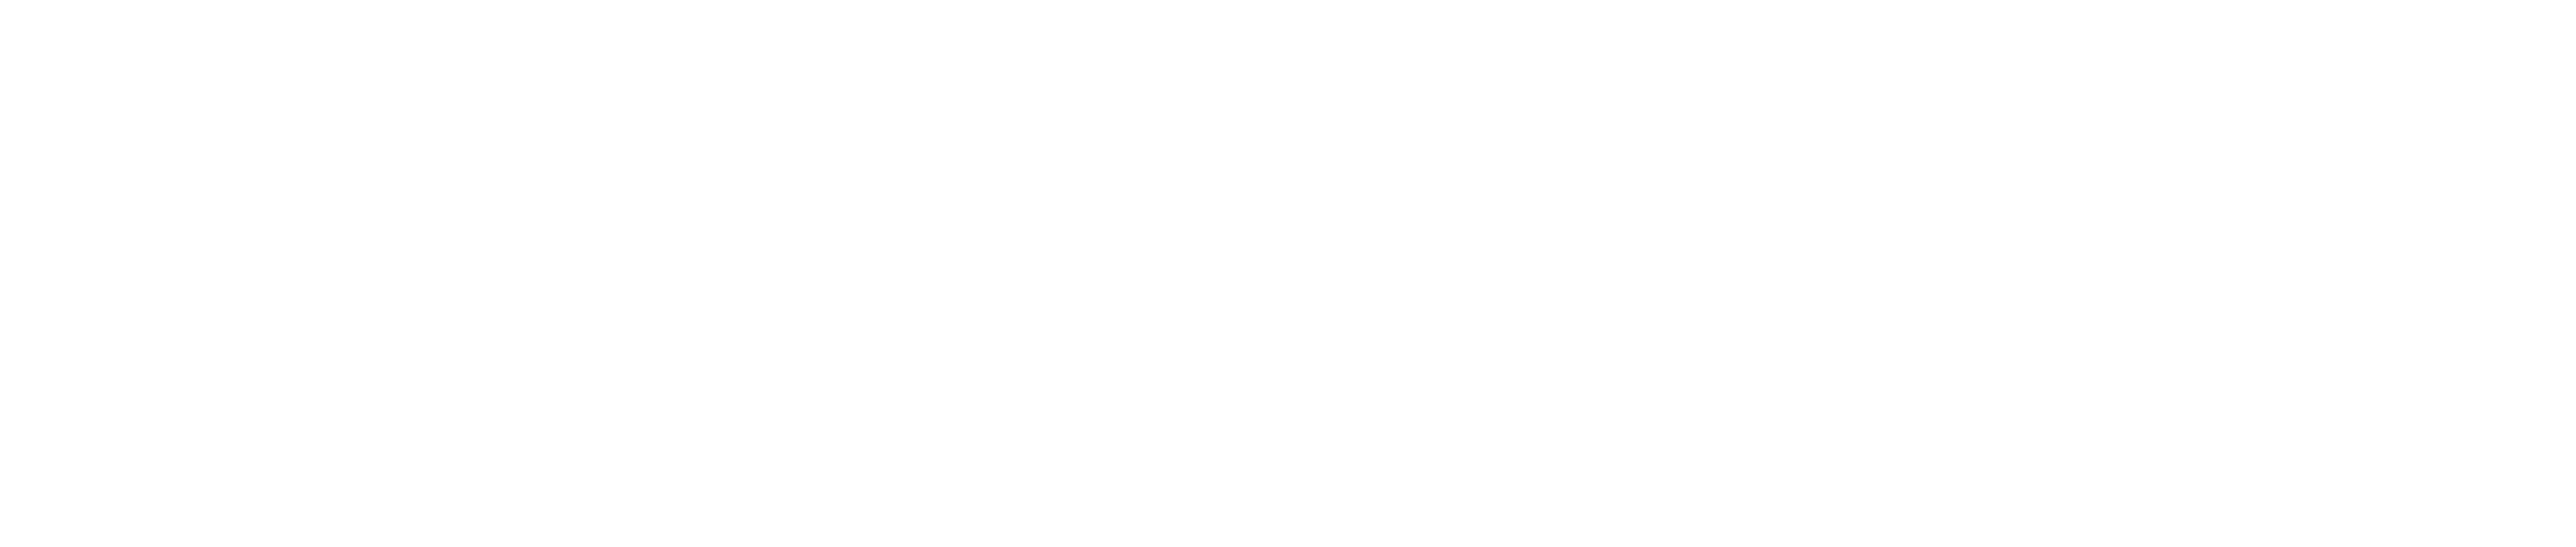 http://www.weibenh5.com//newhome/images/weiben-logo.png